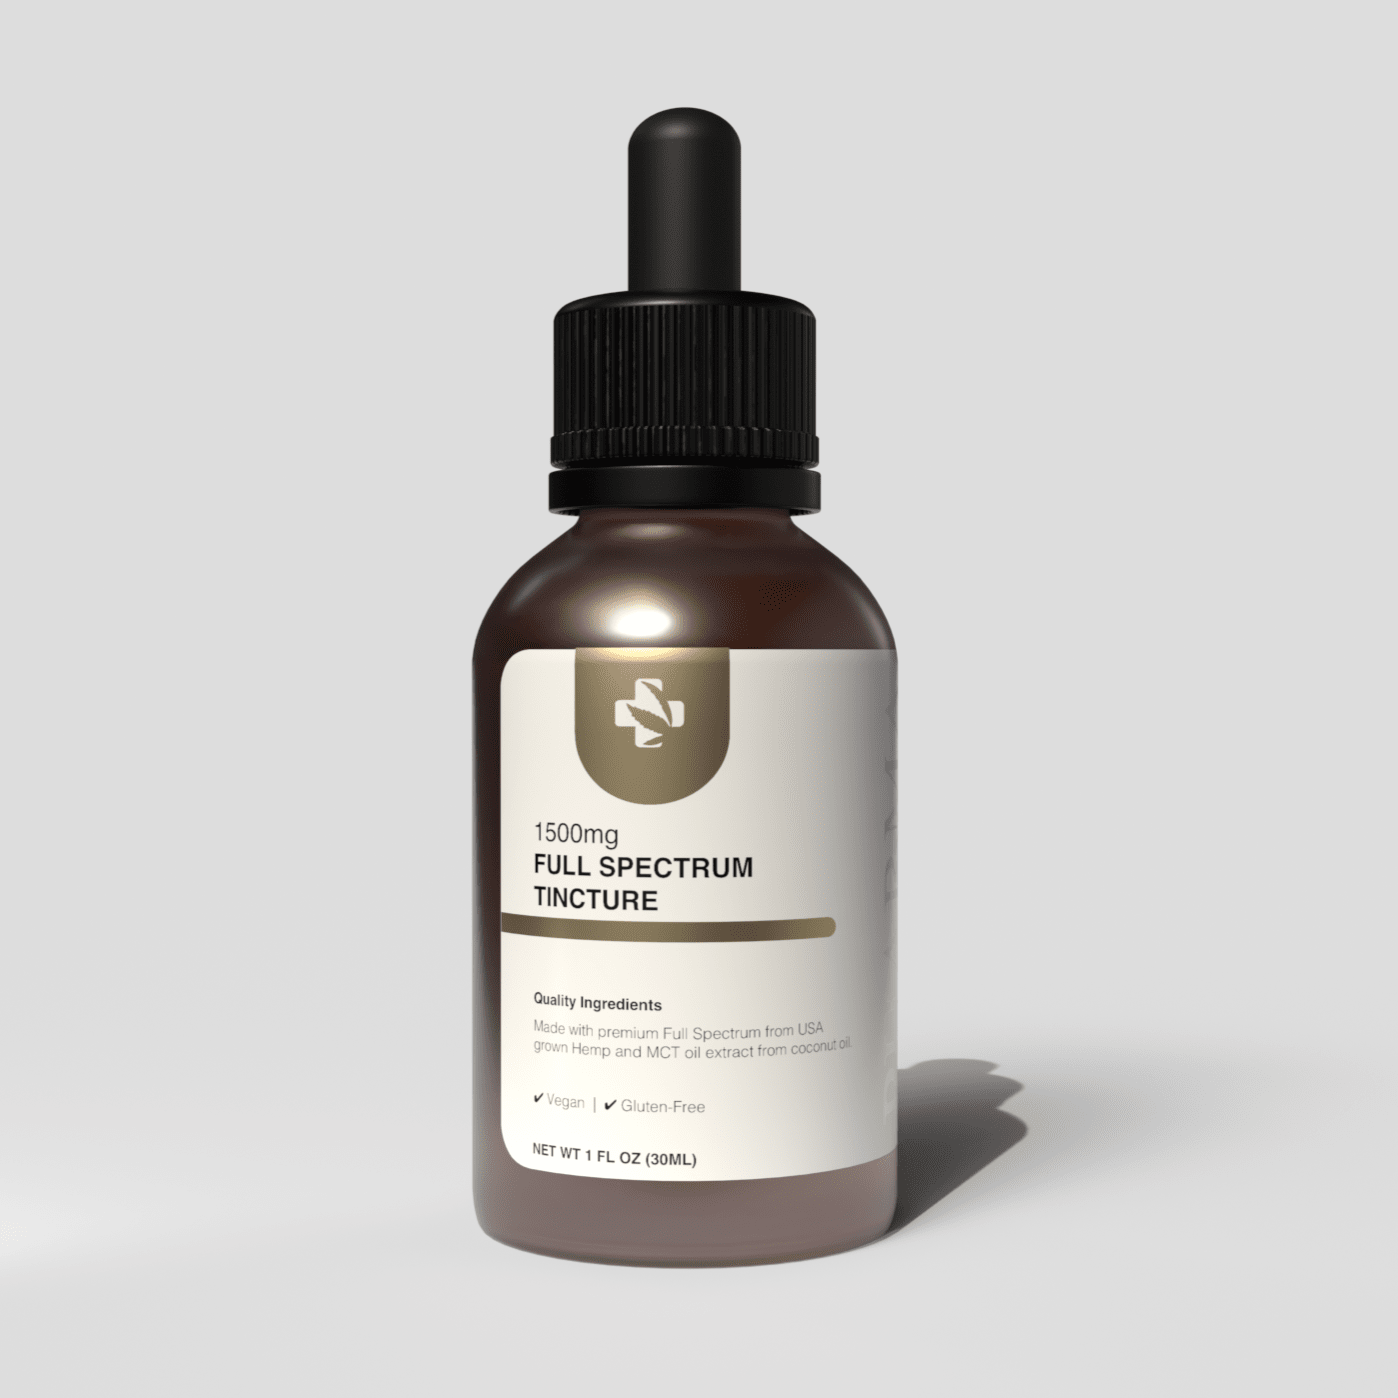 Full Spectrum Tinctures Tinctures PharmaXtracts 1500mg 